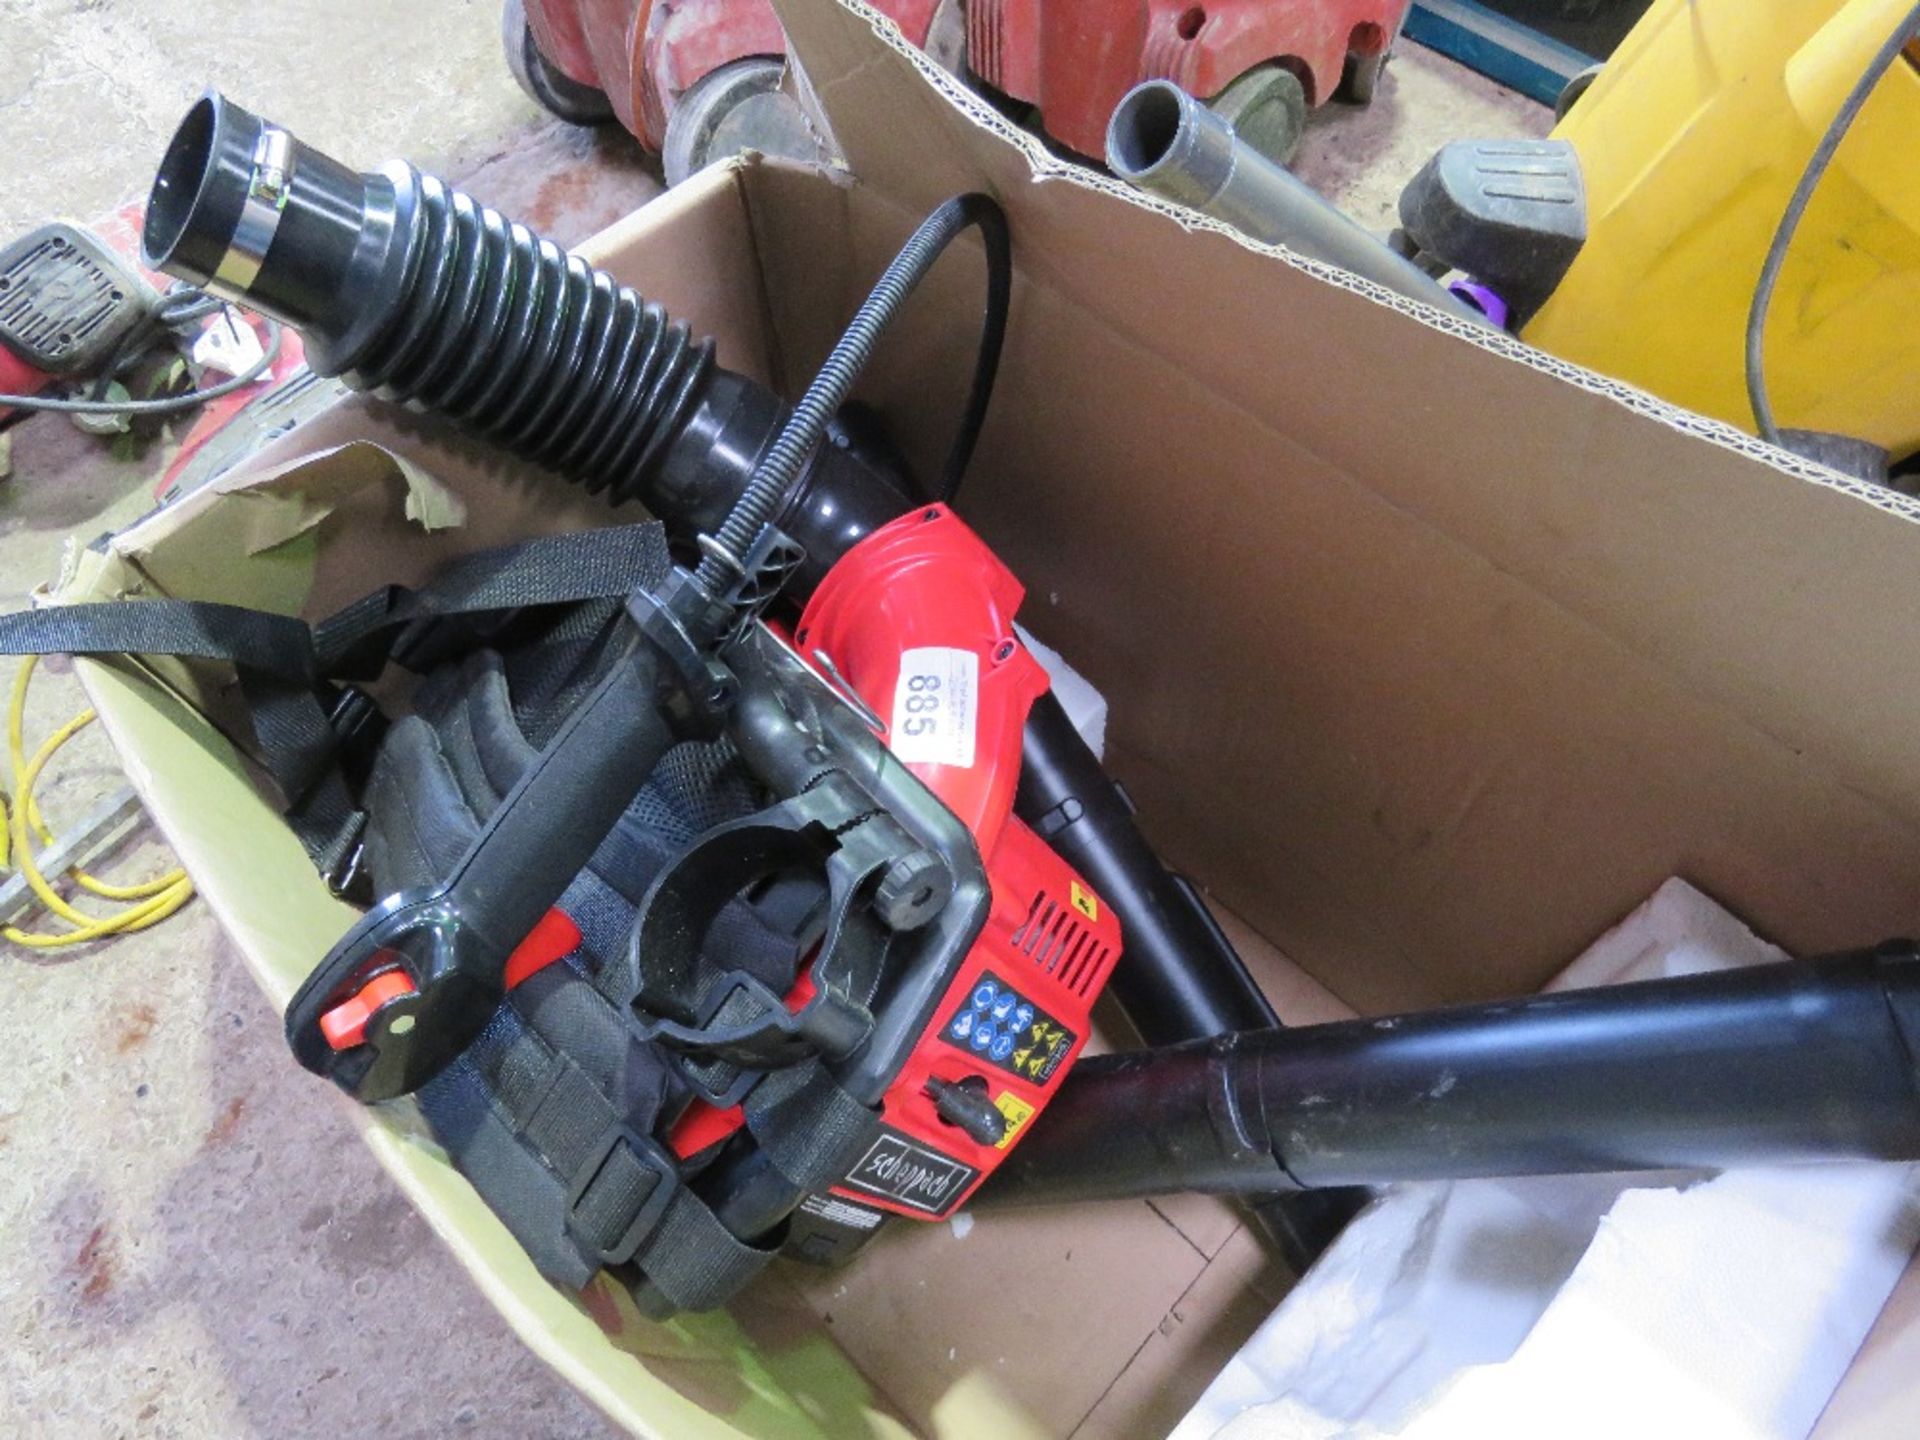 PETROL ENGINED BACKPACK BLOWER IN A BOX. - Image 7 of 7